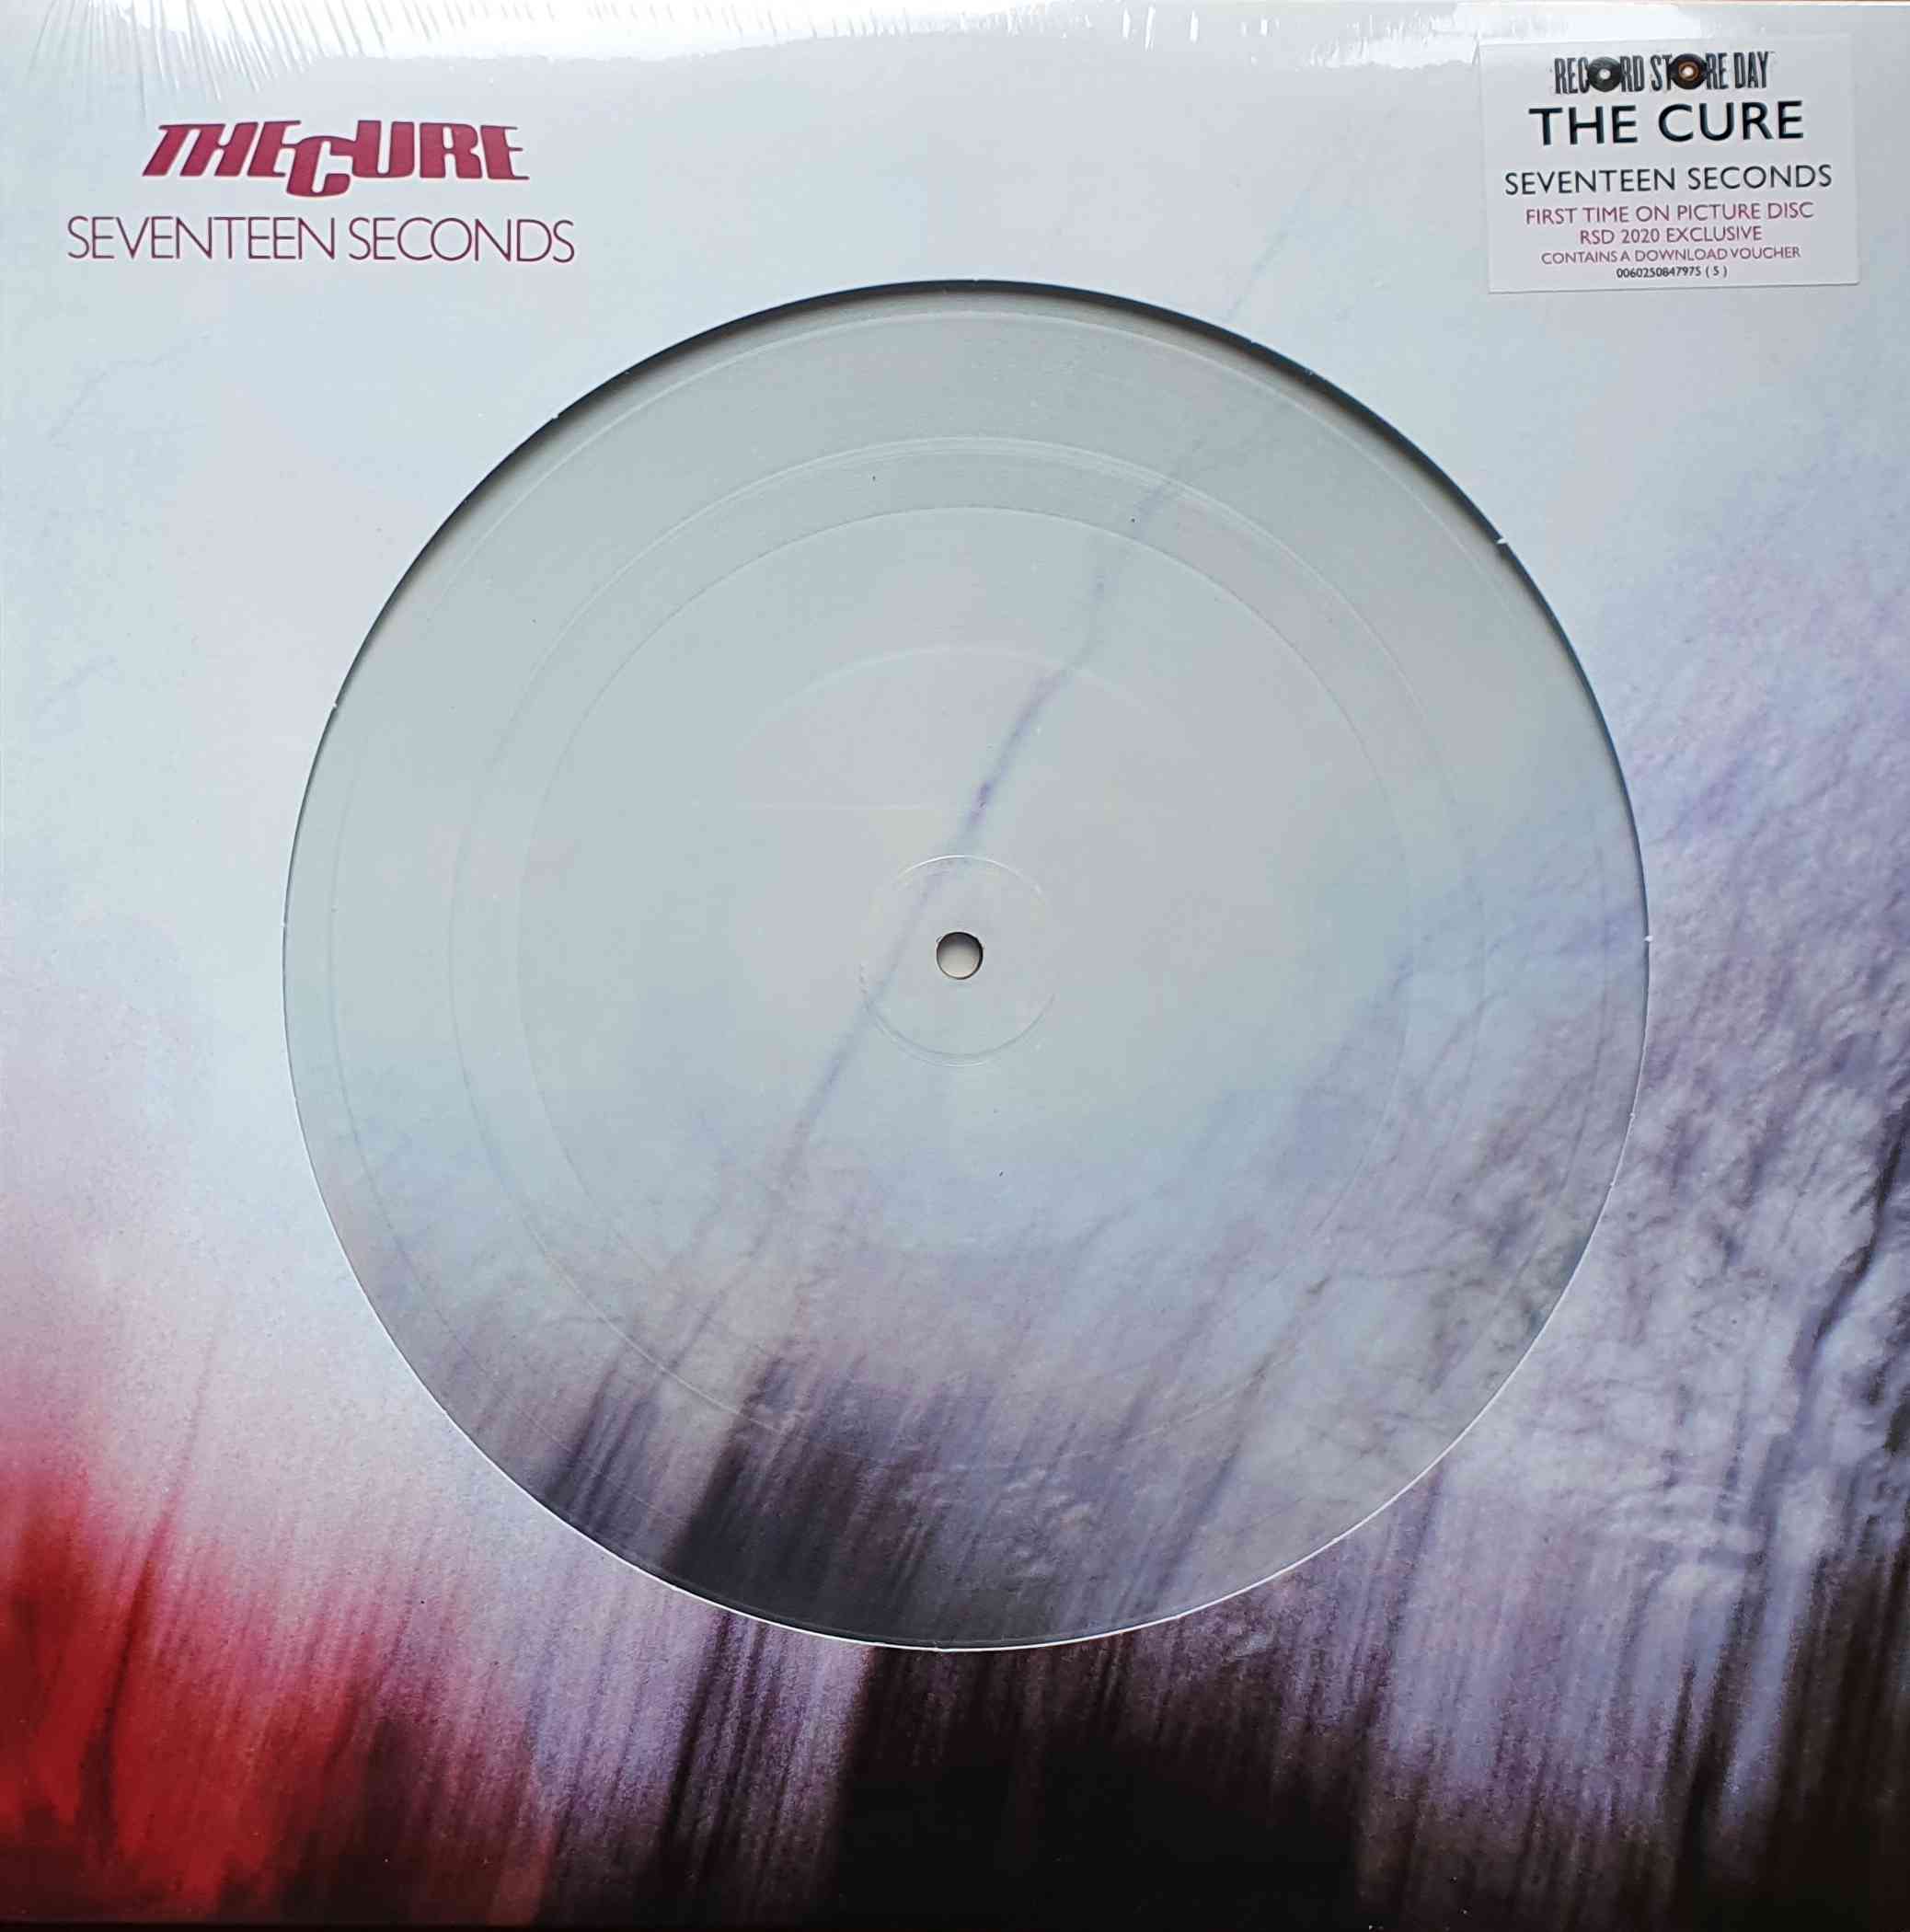 Picture of Seventeen seconds - Limited edition picture discs - Record Store Day 2020 by artist The Cure 